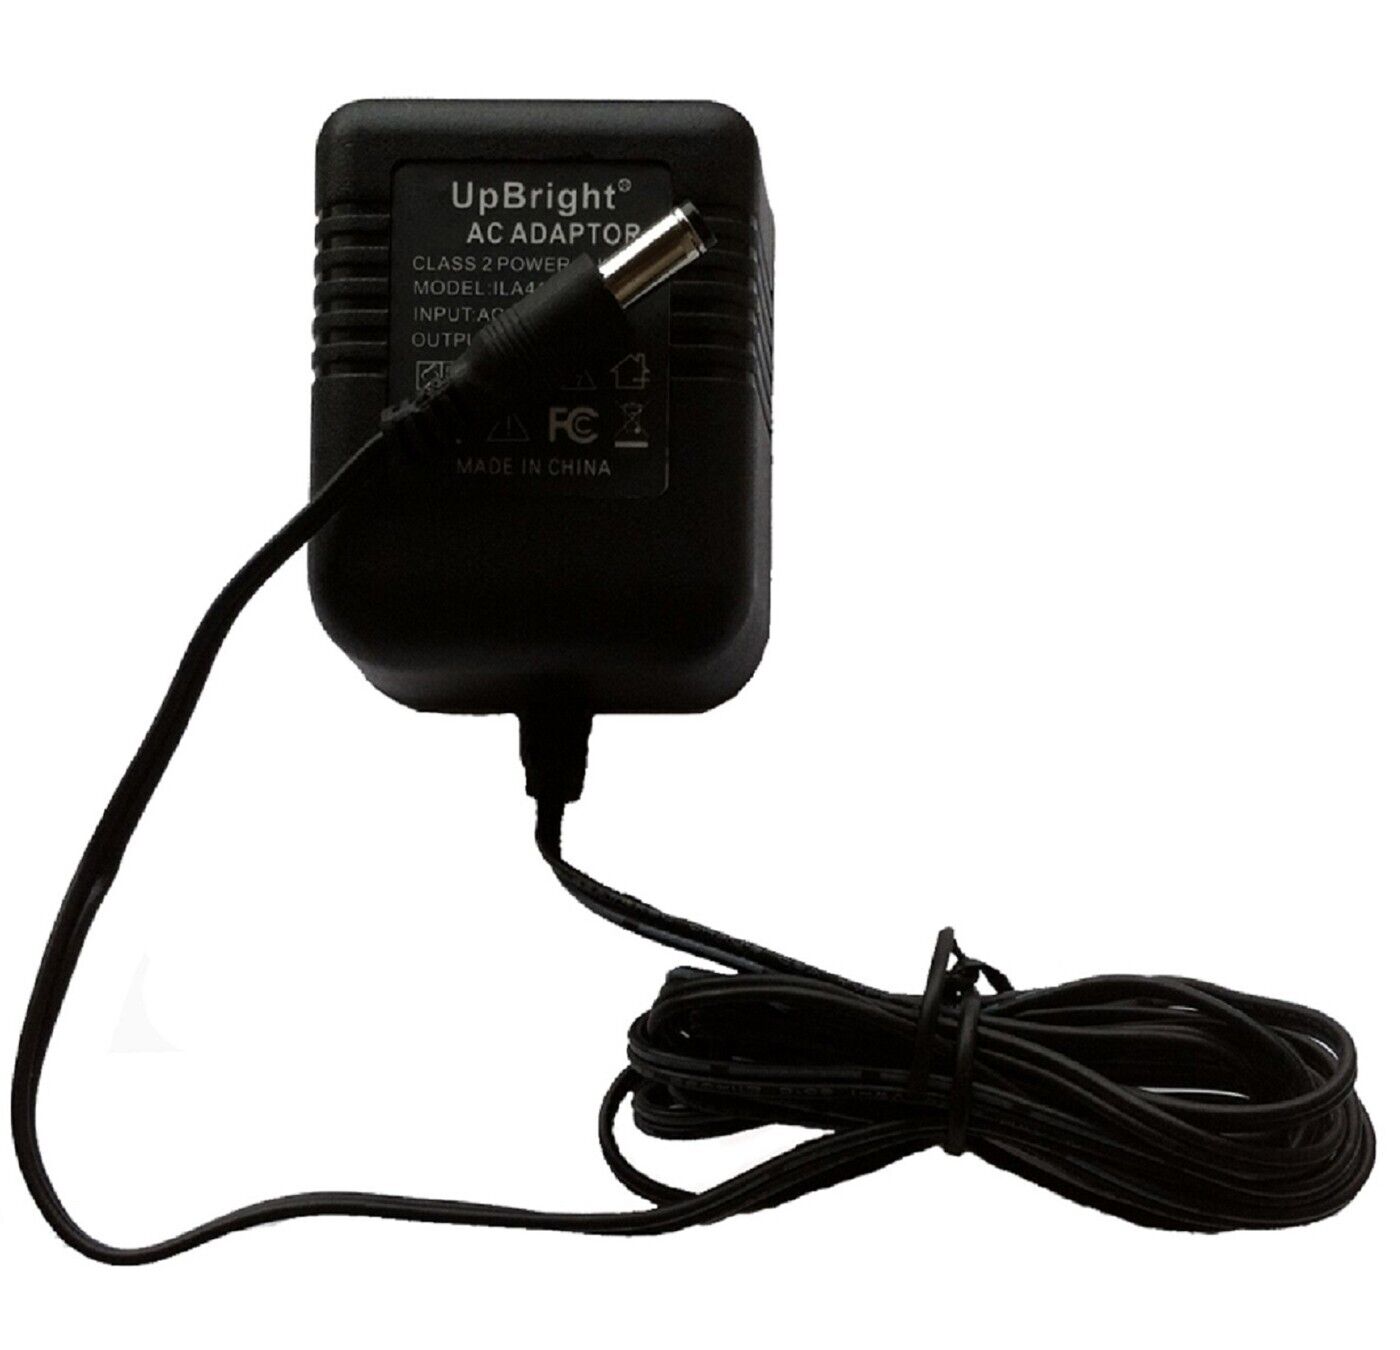 AC Adapter Charger For Lionel 990 Legacy Command Set Control System TMCC 6-14295